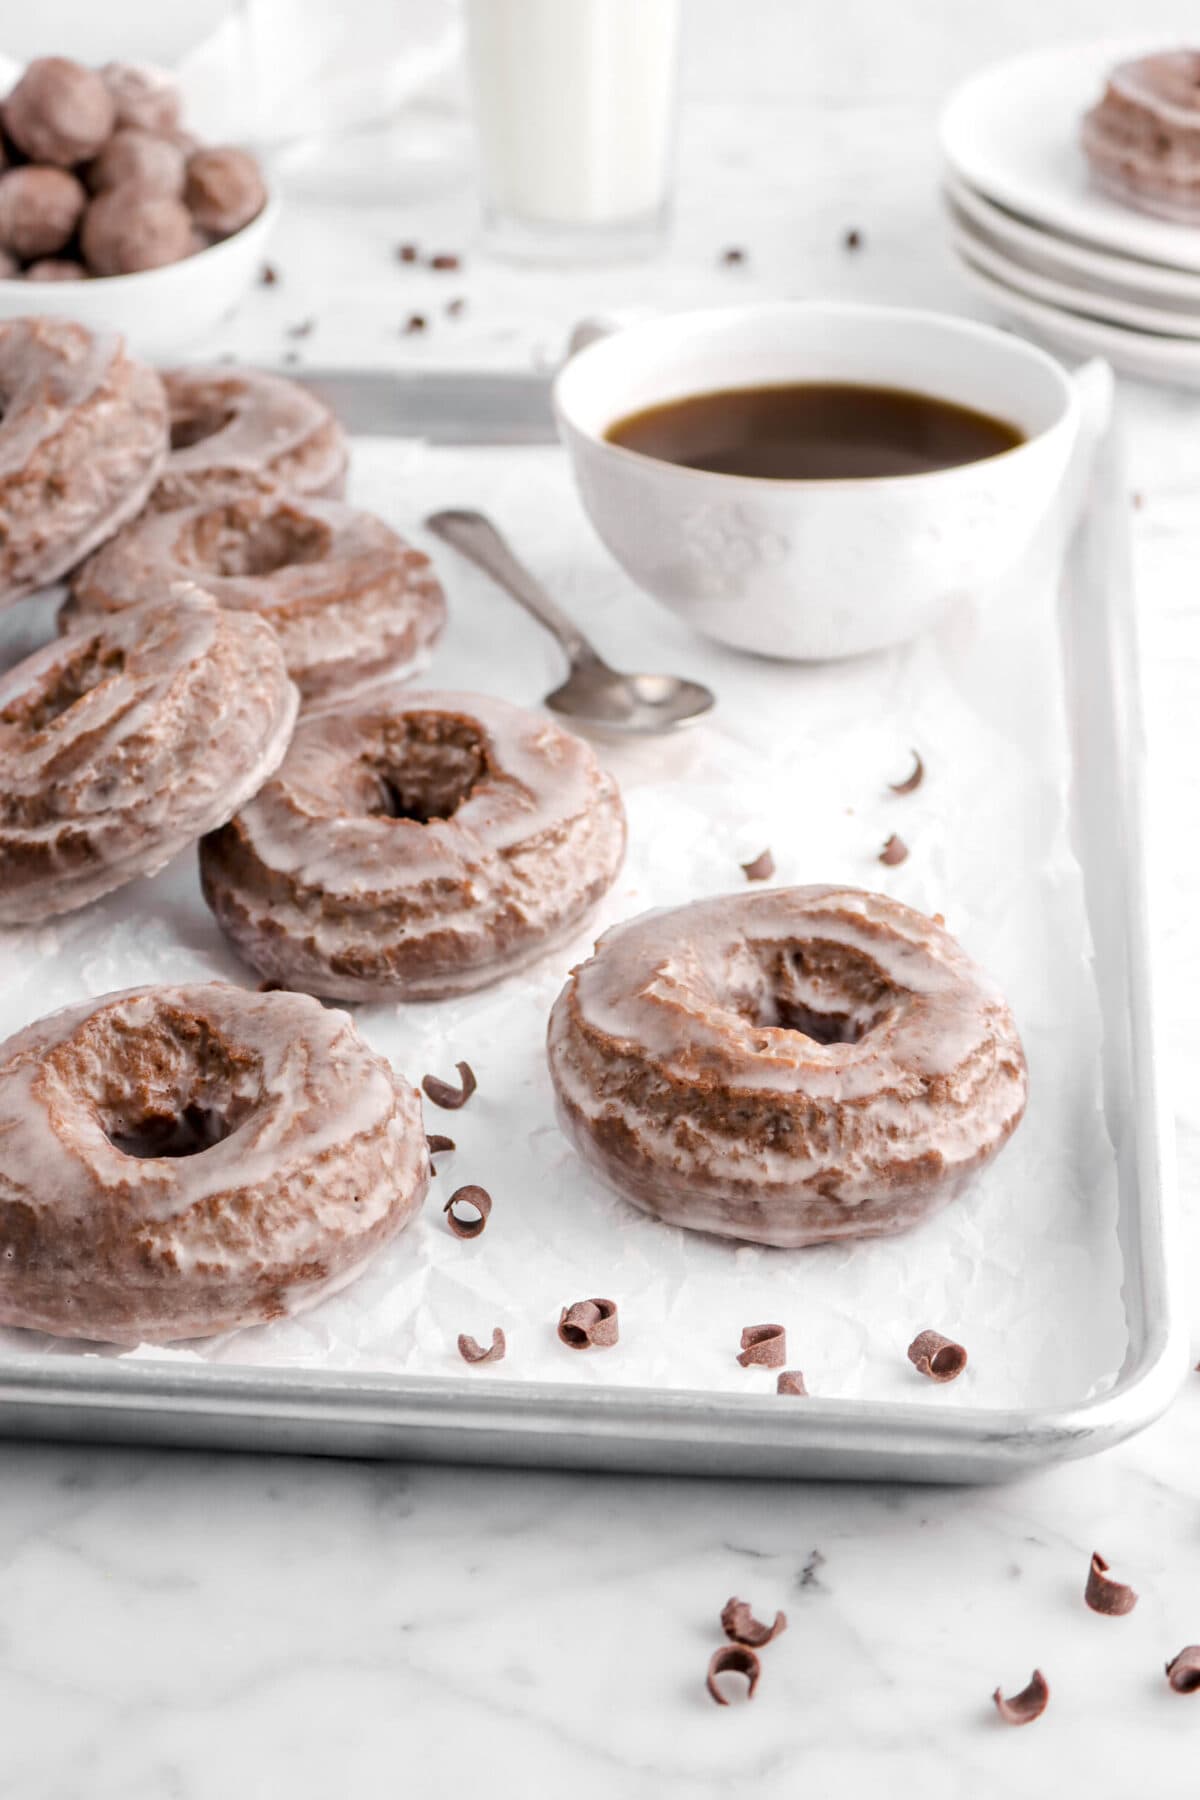 chocolate doughnut on parchment paper in sheet pan with more doughnuts behind and mug of coffee